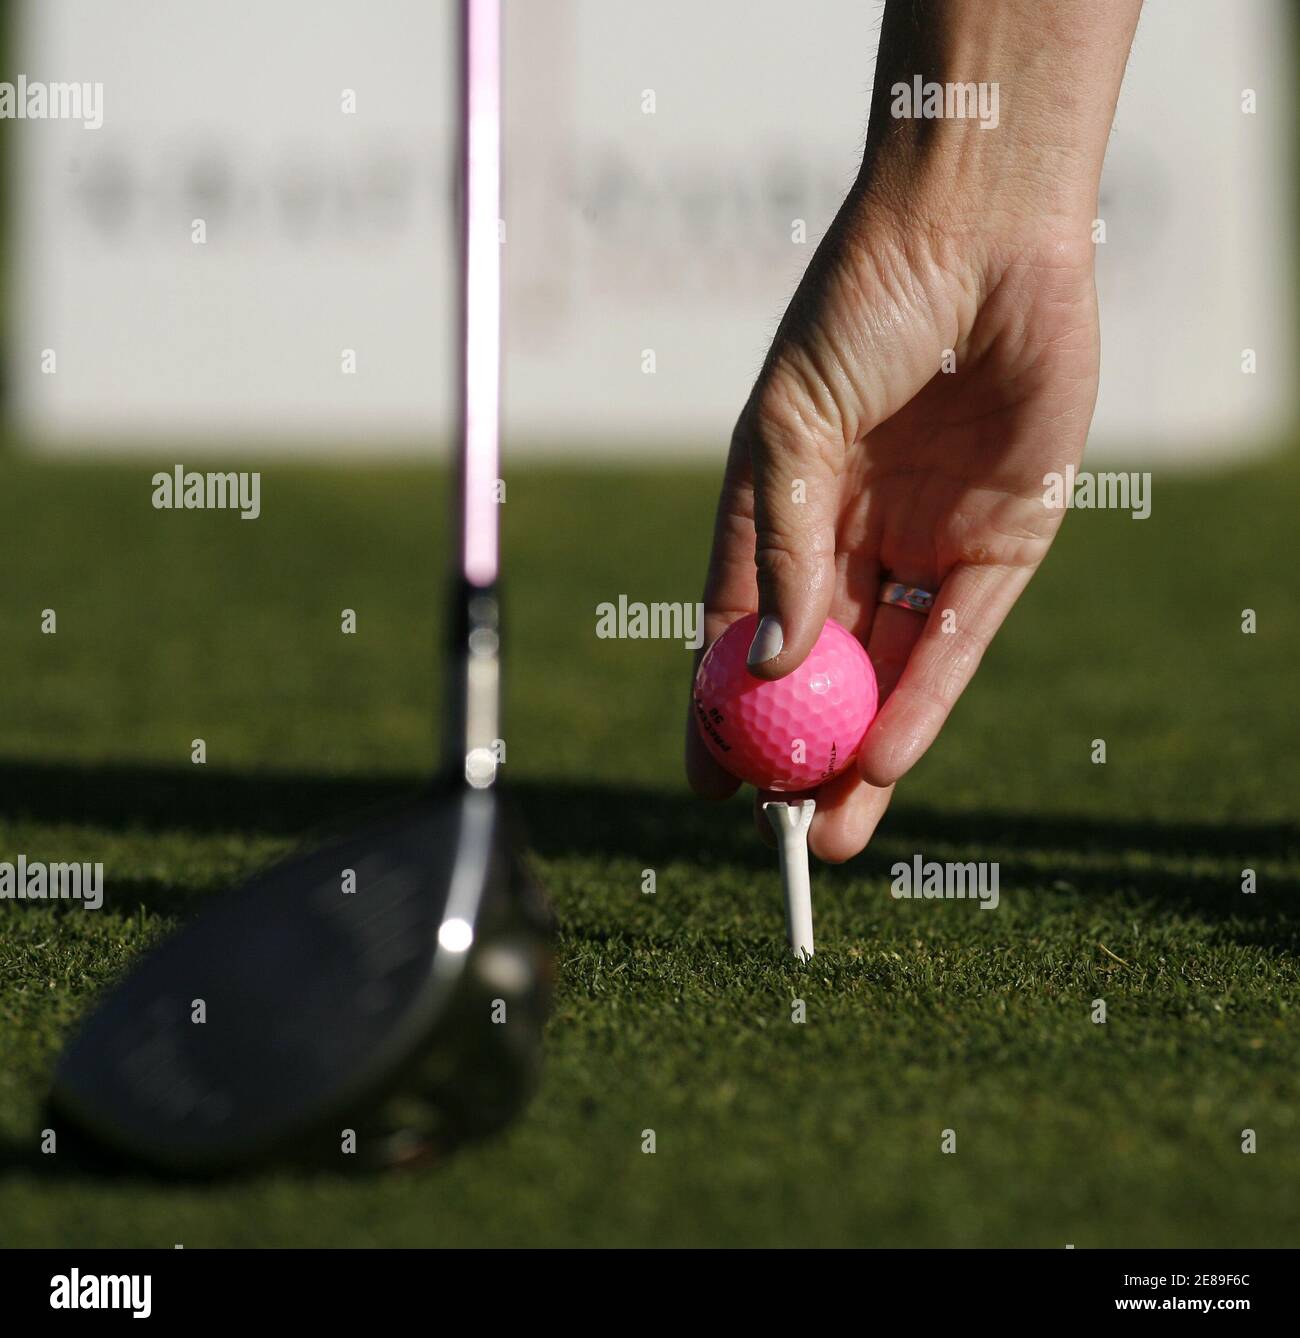 Paula Creamer places her pink Precept Tour ball on the tee at the first tee box at the Kraft Nabisco Championship golf tournament in Rancho Mirage, California April 2, 2006. For each birdie she makes with the ball, Bridgestone, the company that makes the ball, will make a donation to the LPGA/USGA Girls Golf program. REUTERS/Danny Moloshok Stock Photo